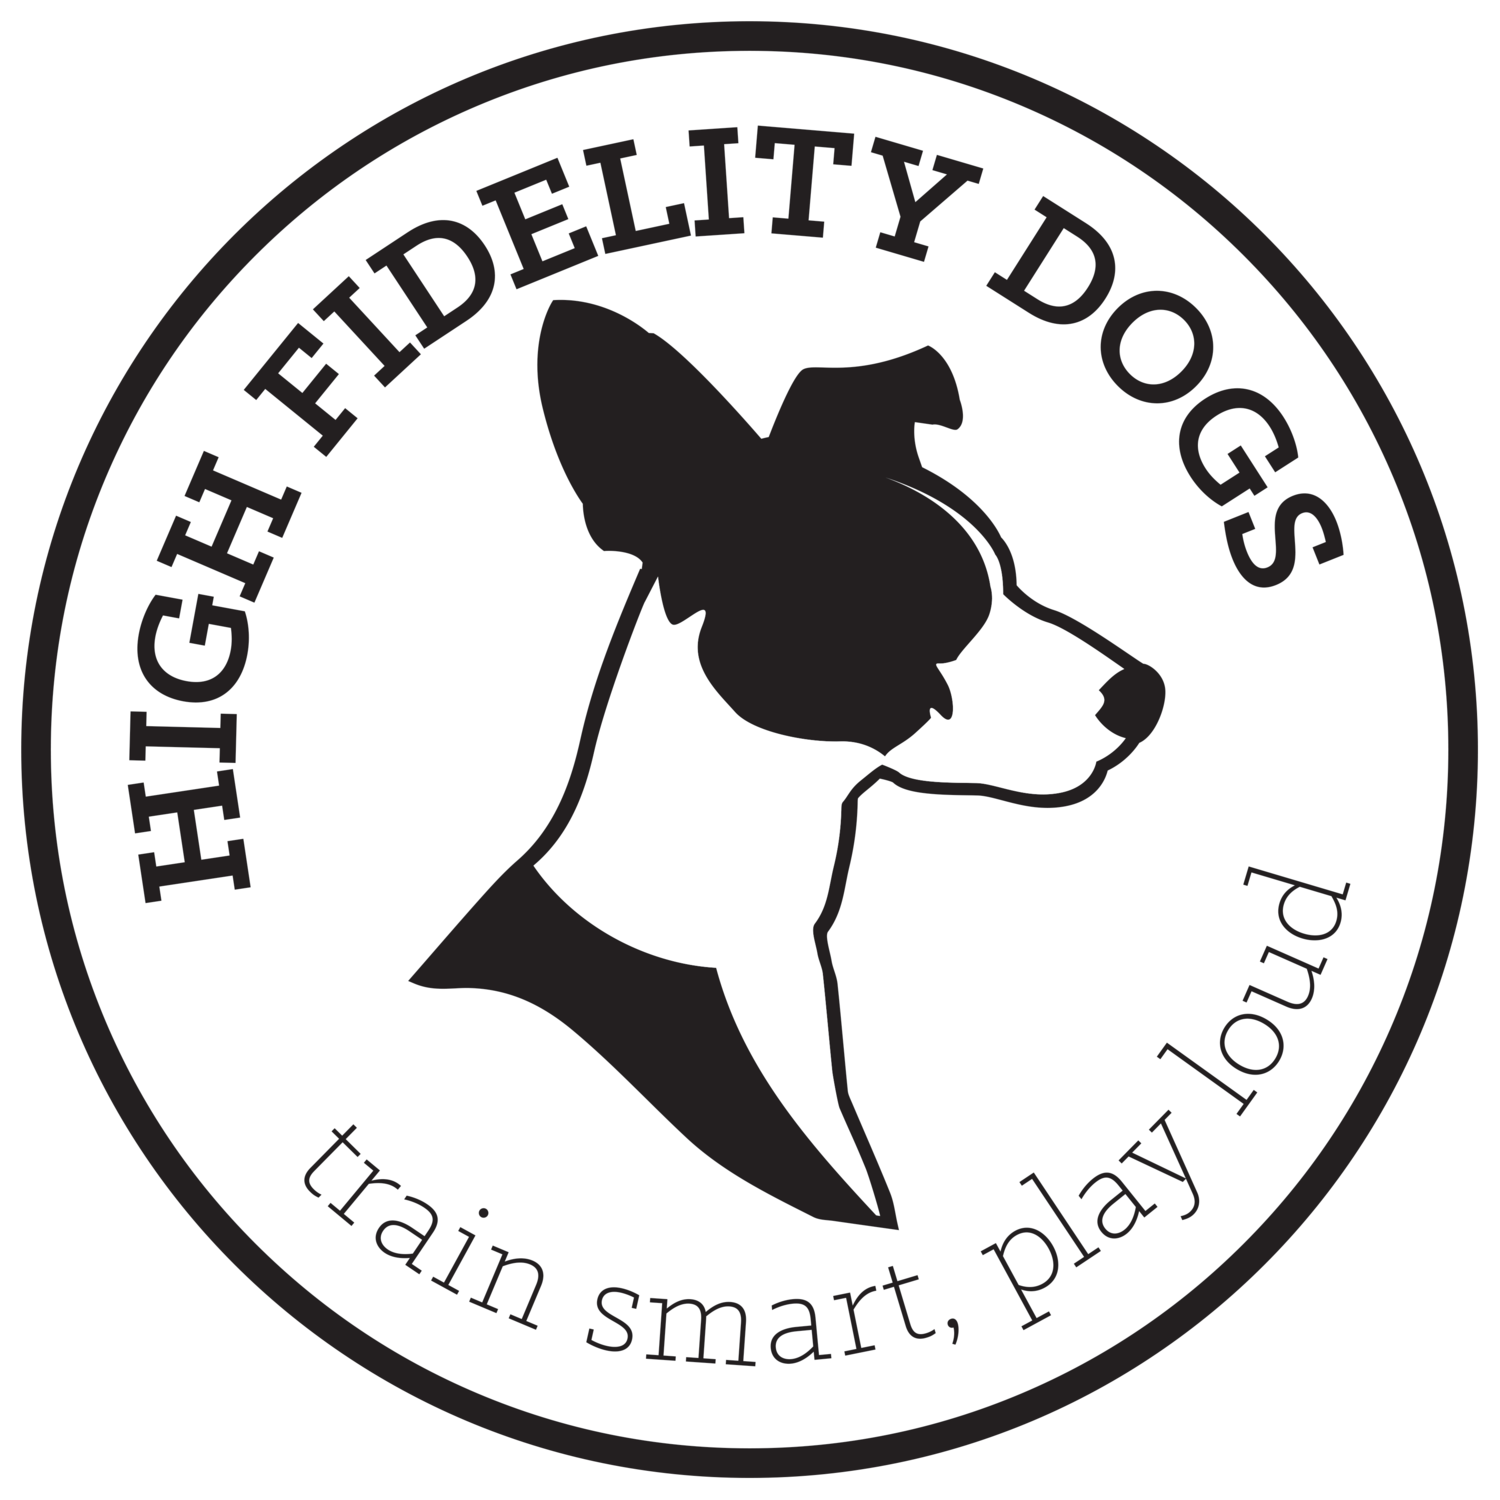 High Fidelity Dogs